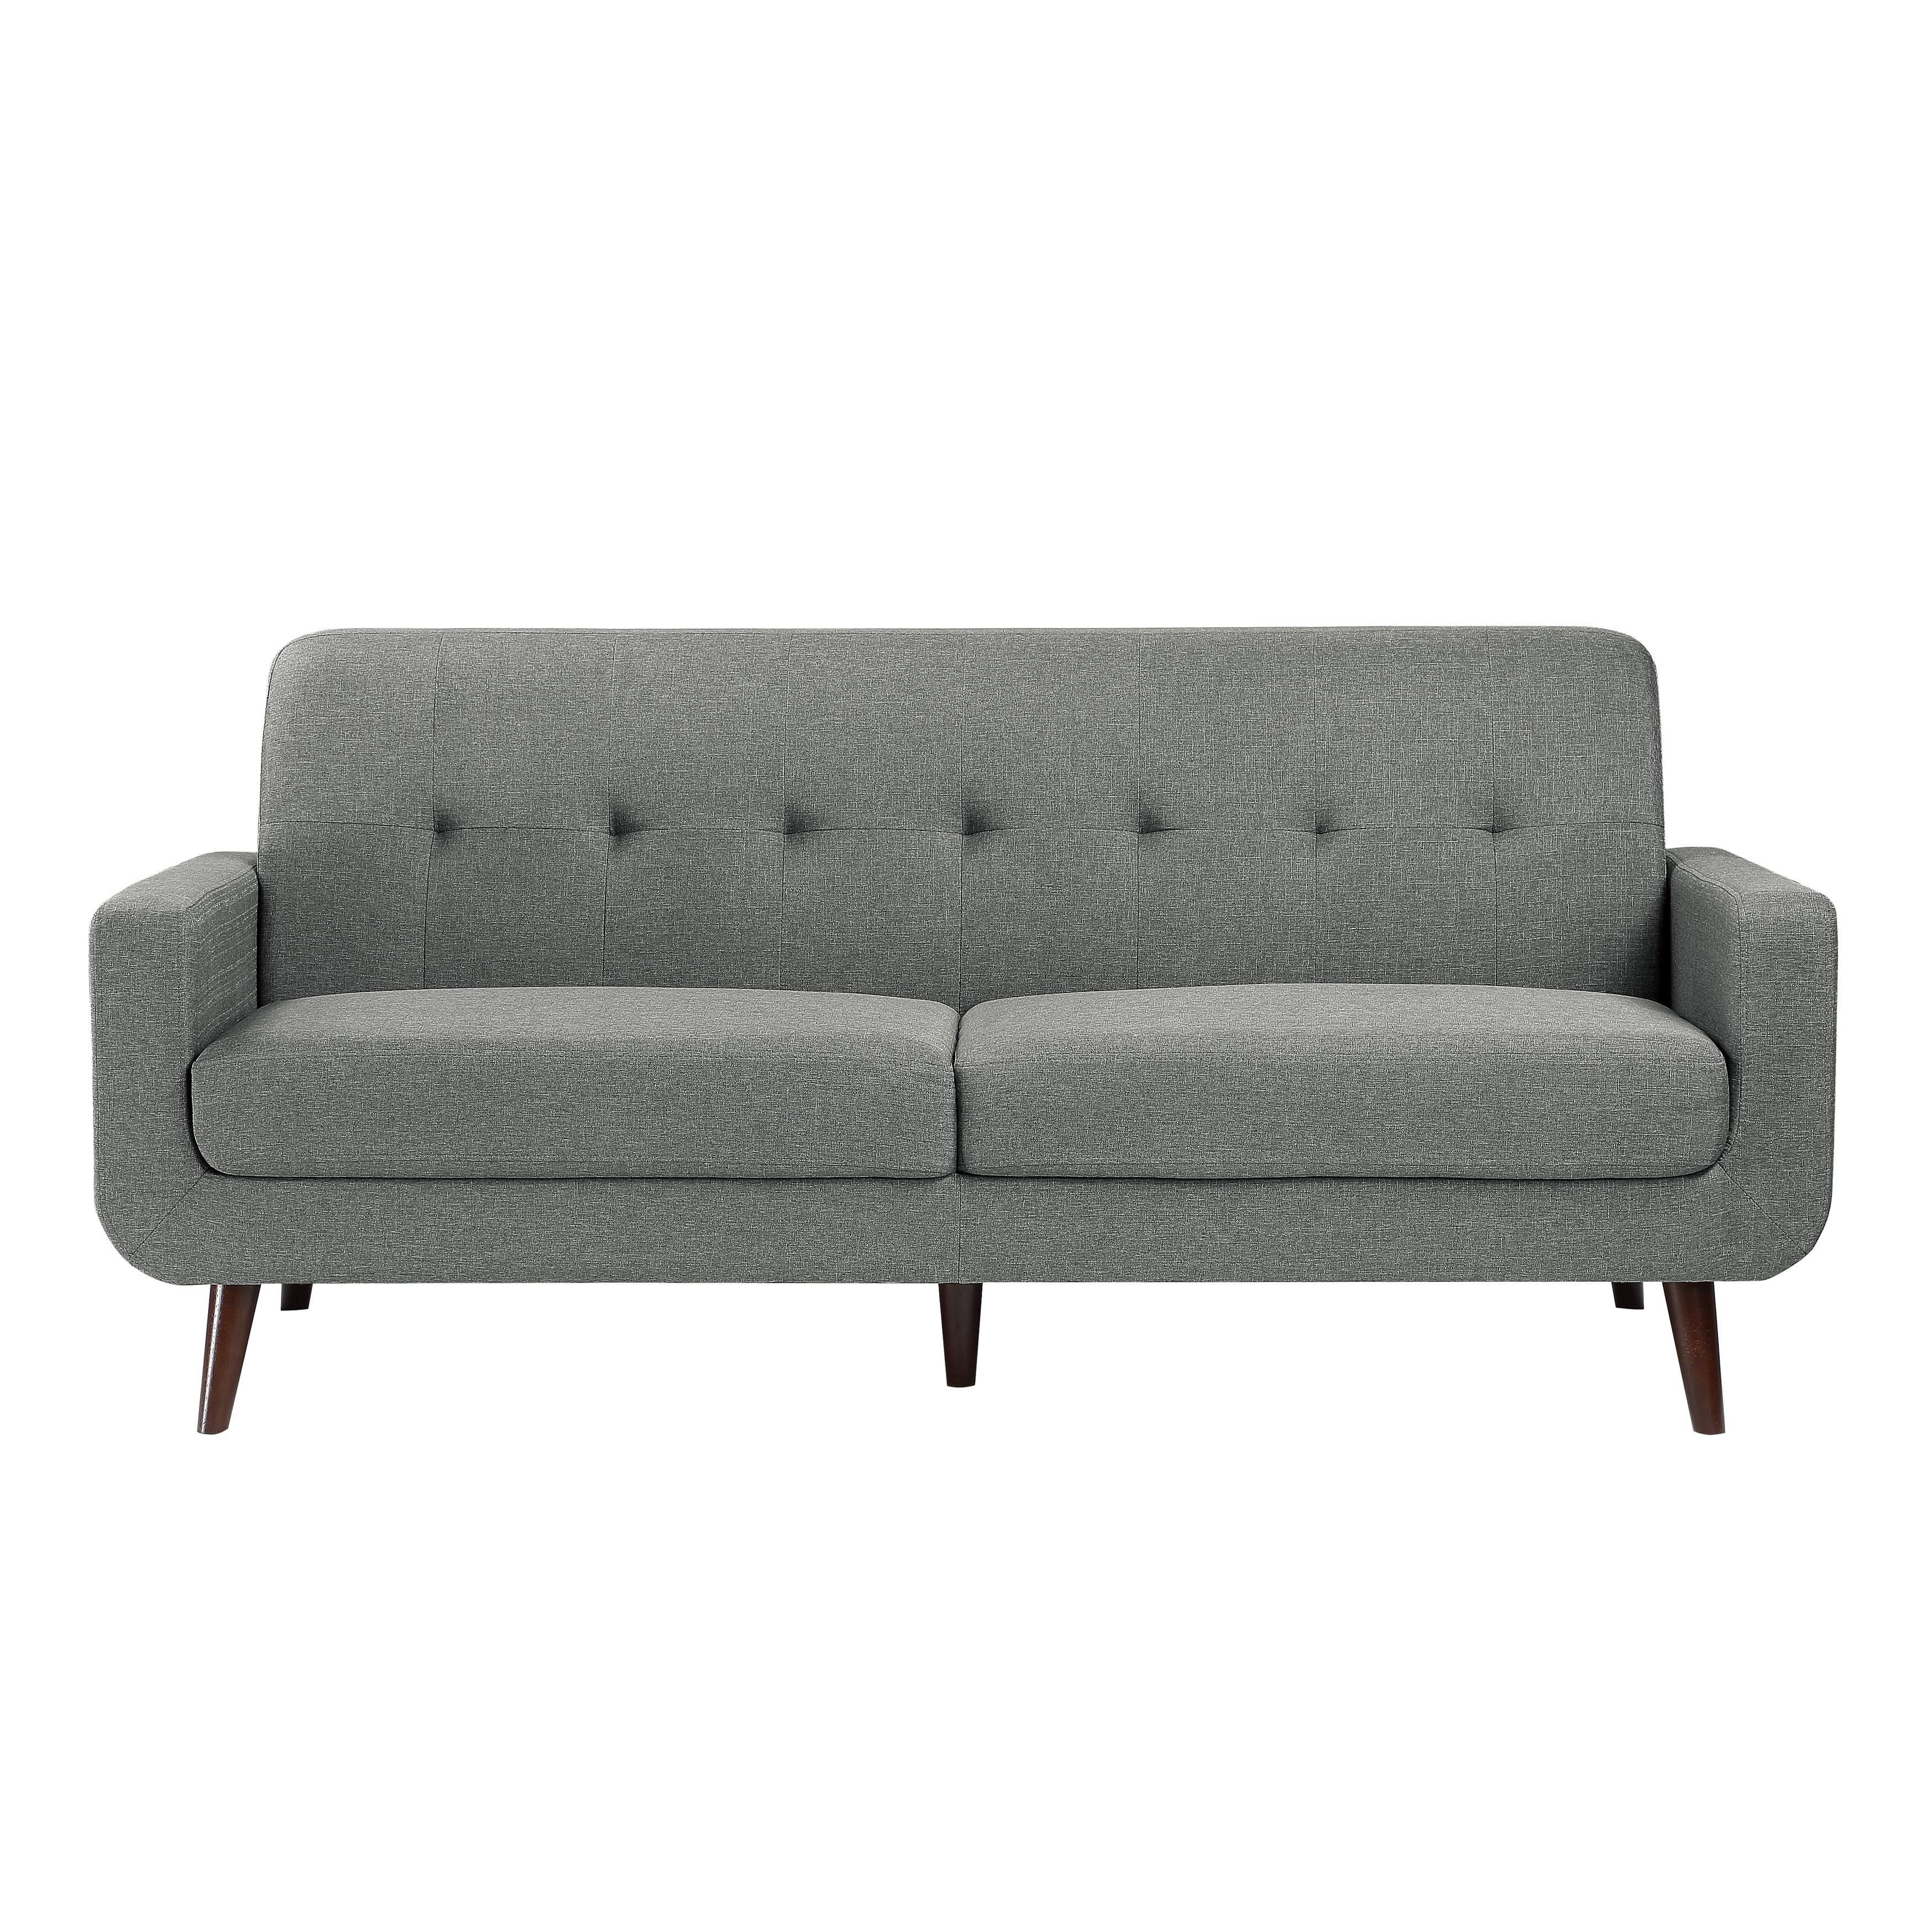 Modern Sofa 9433GY-3 Fitch 9433GY-3 in Gray 